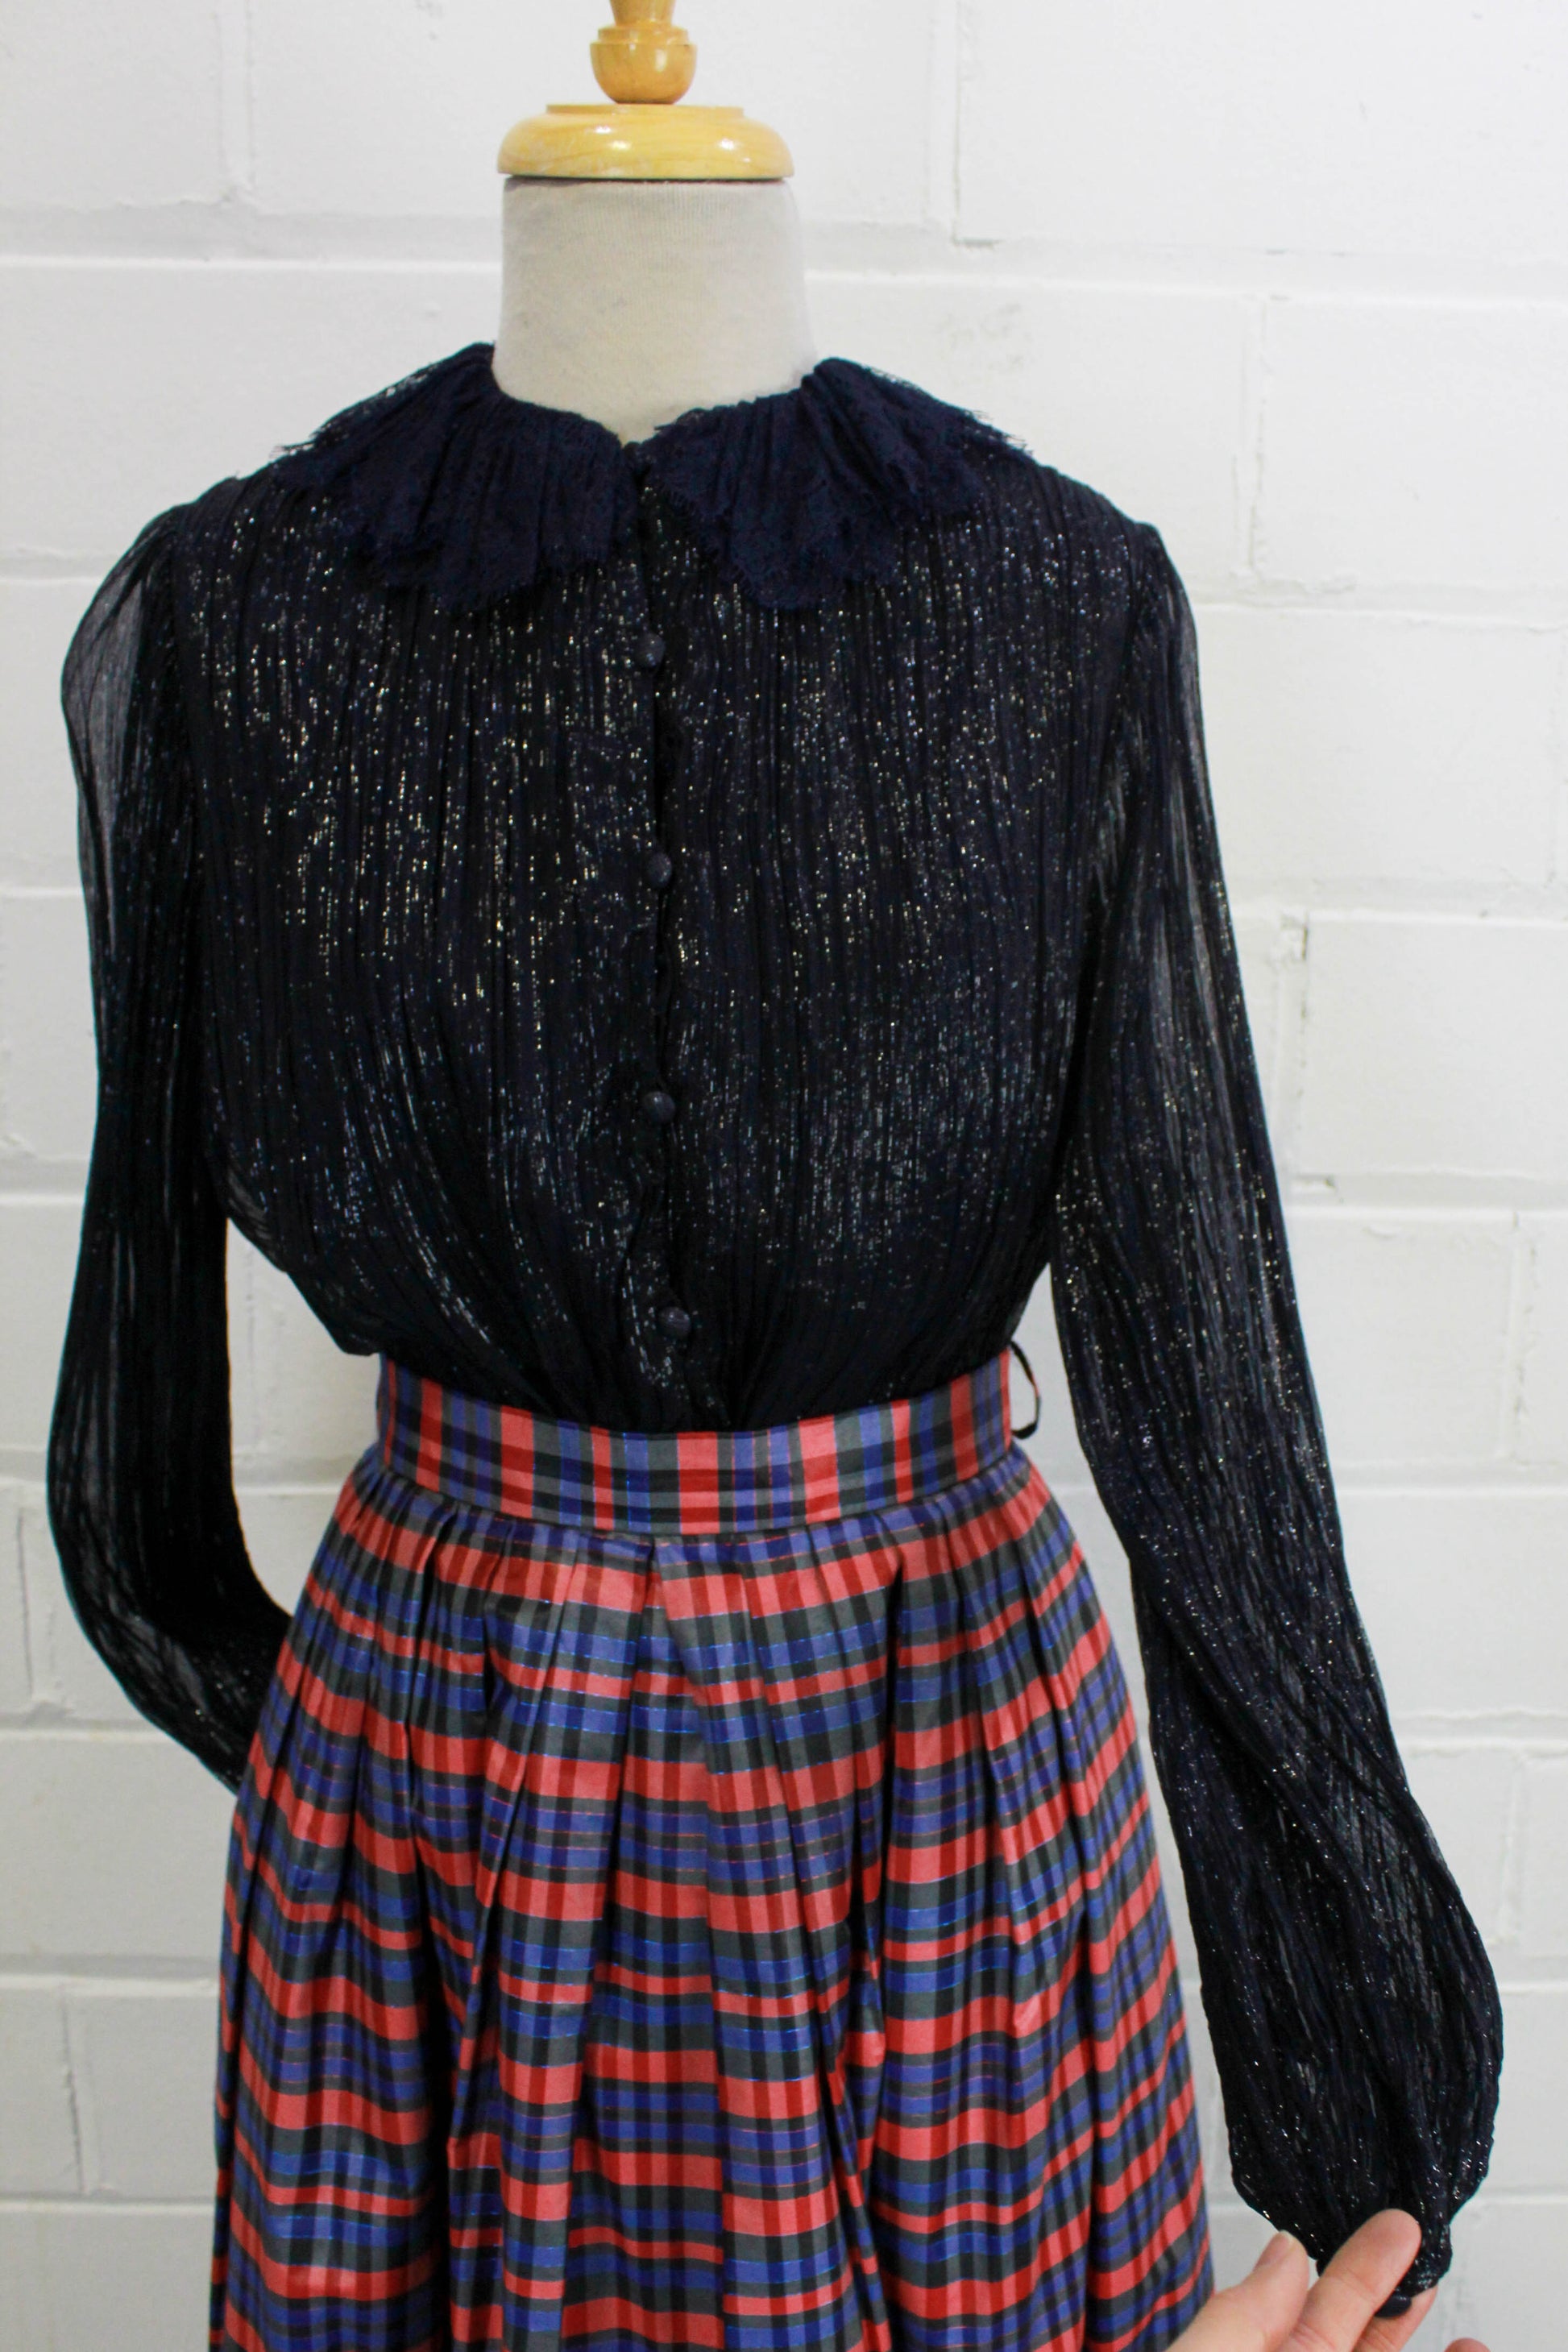 1990s chanel blouse with lace ruffle collar, made from navy silk lurex 